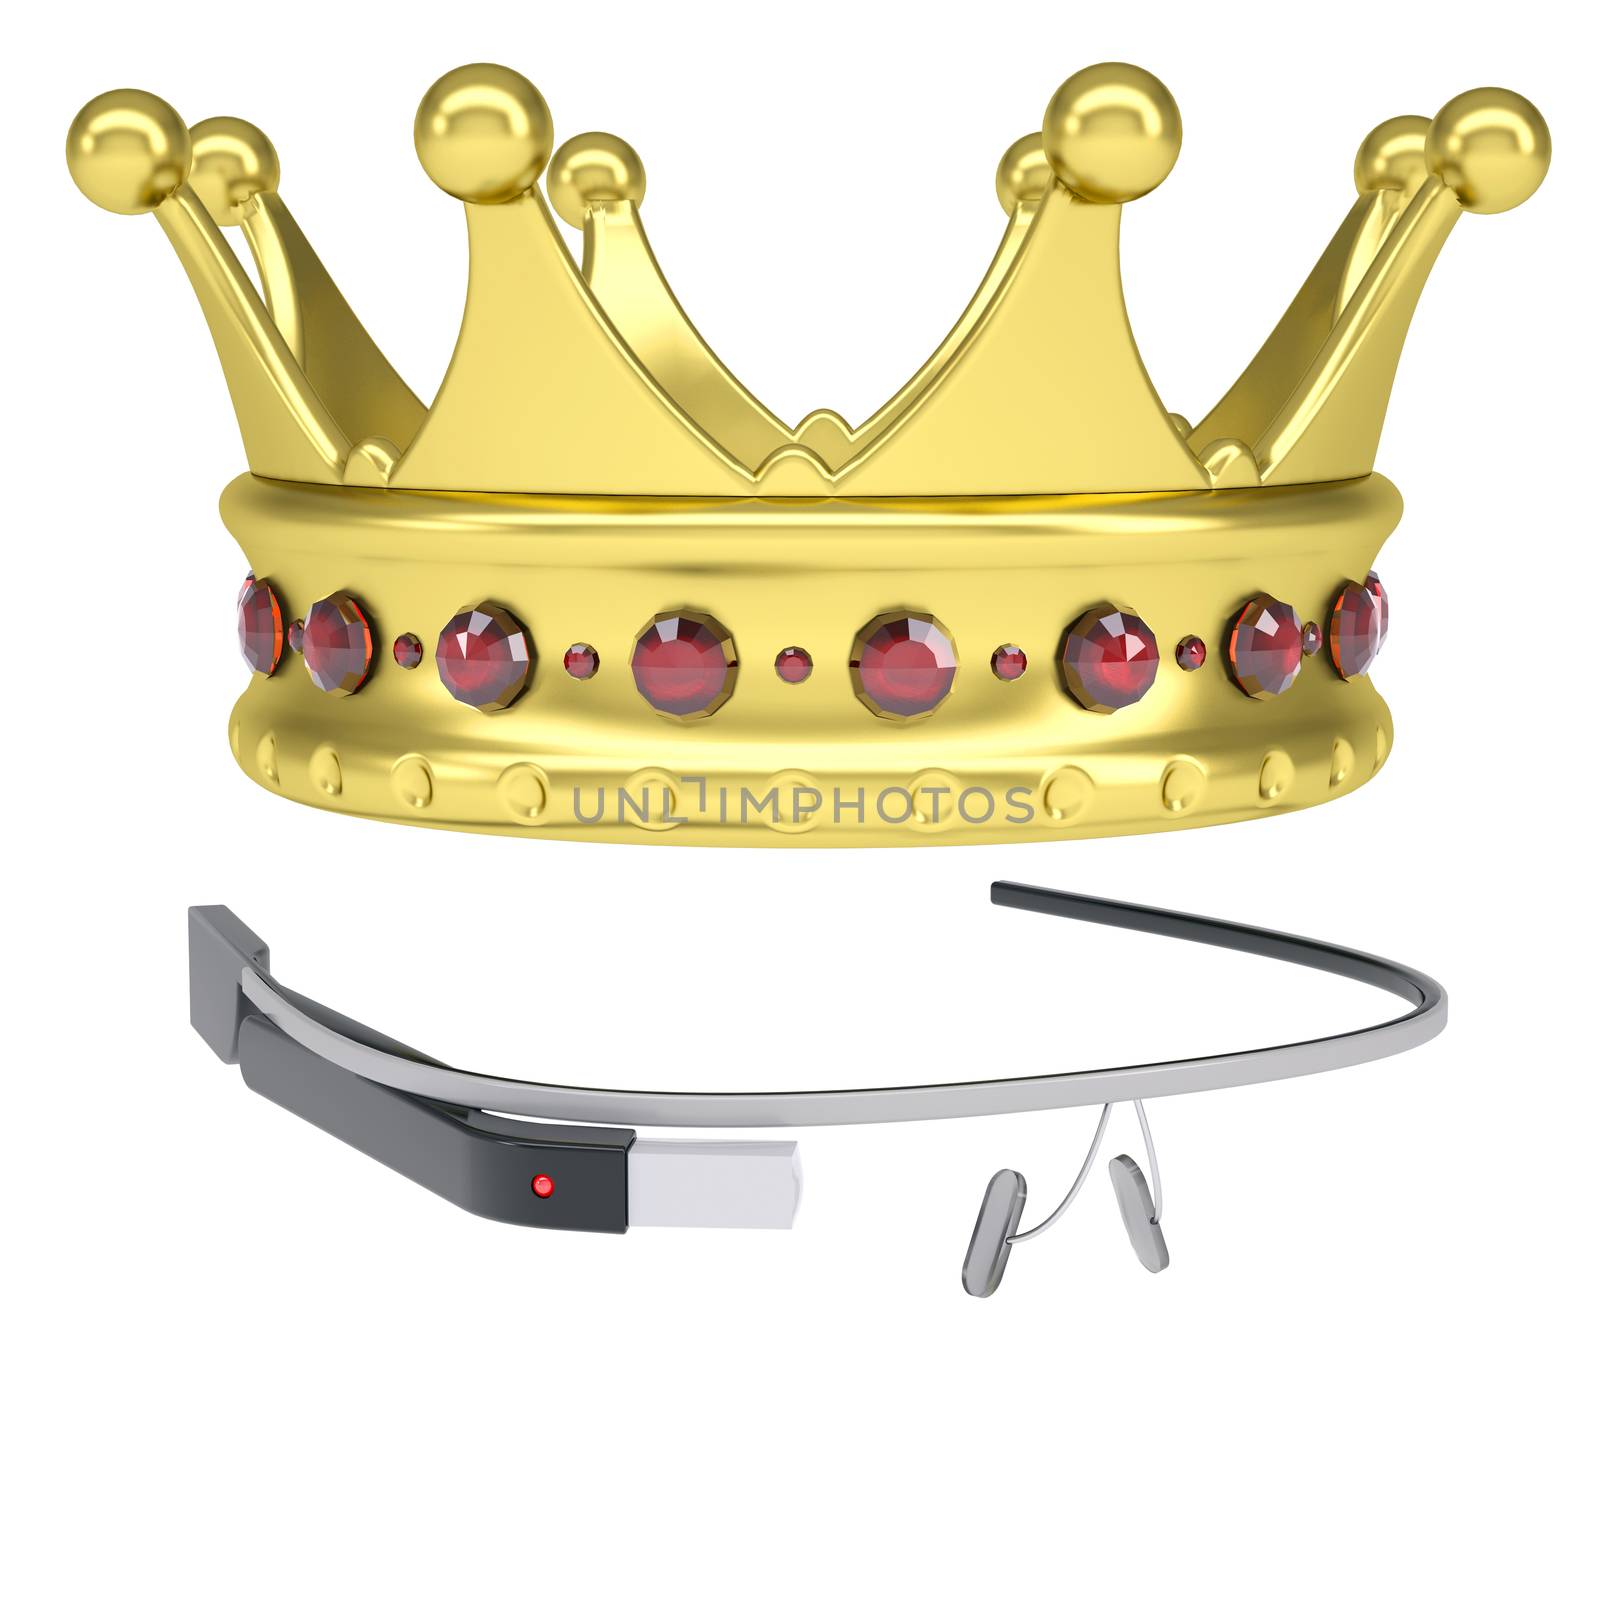 Google Glass and a golden crown by cherezoff